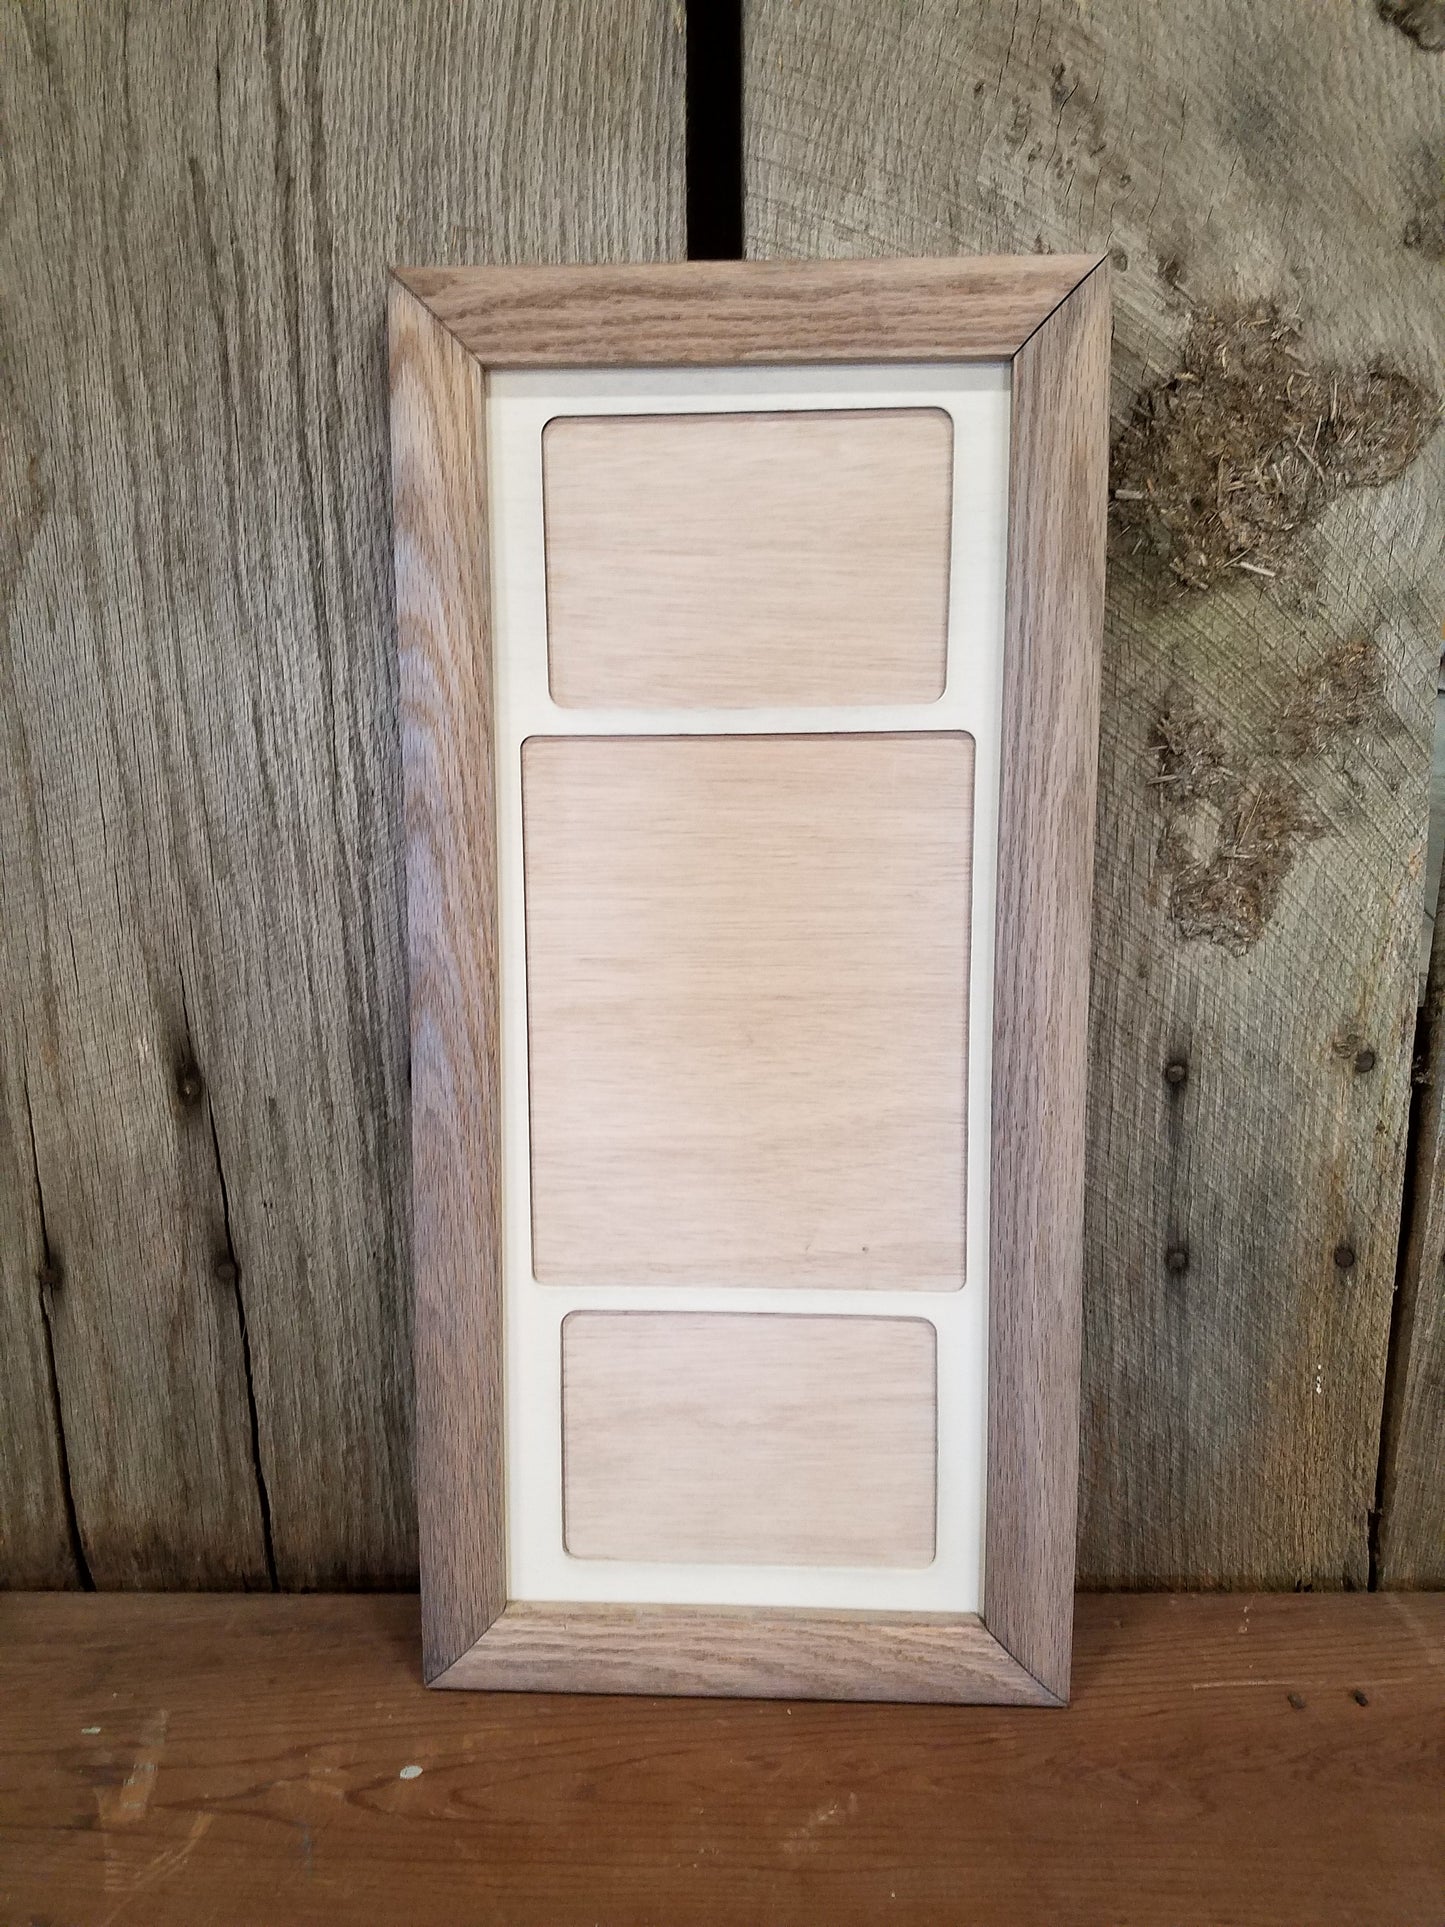 Farmhouse, 8x10, 5x7, College, Picture Frame, Mat, Mat-board, Wood,, Weathered Oak, Handmade, Country, Rustic, Primitive, Multiple